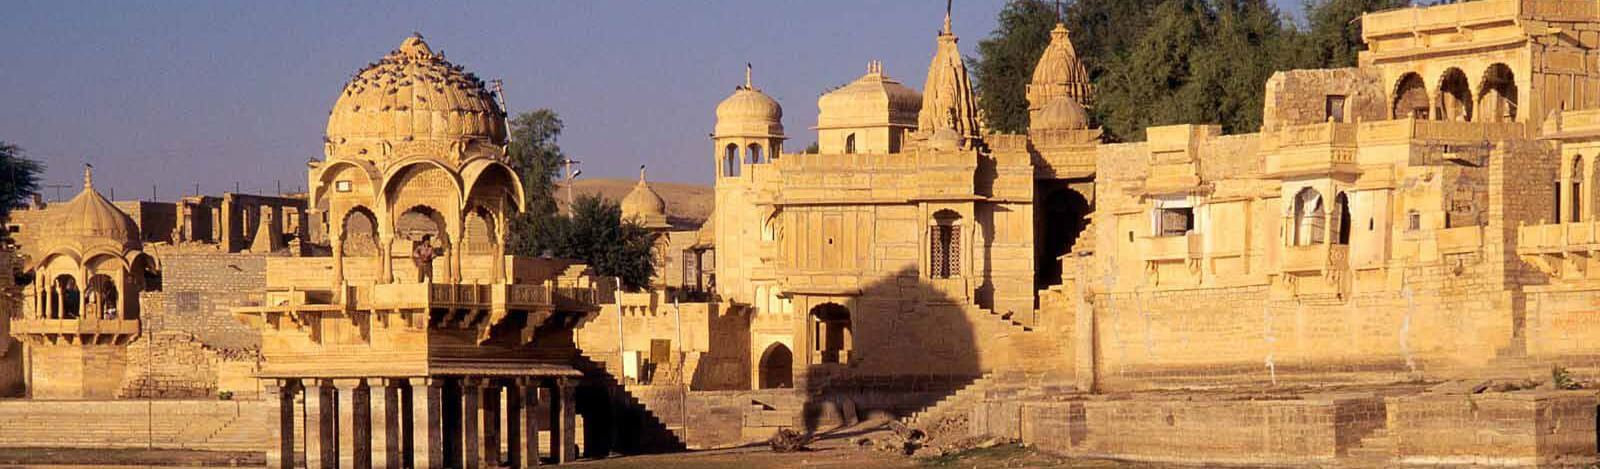 Best of Rajasthan Holidays Tour Package